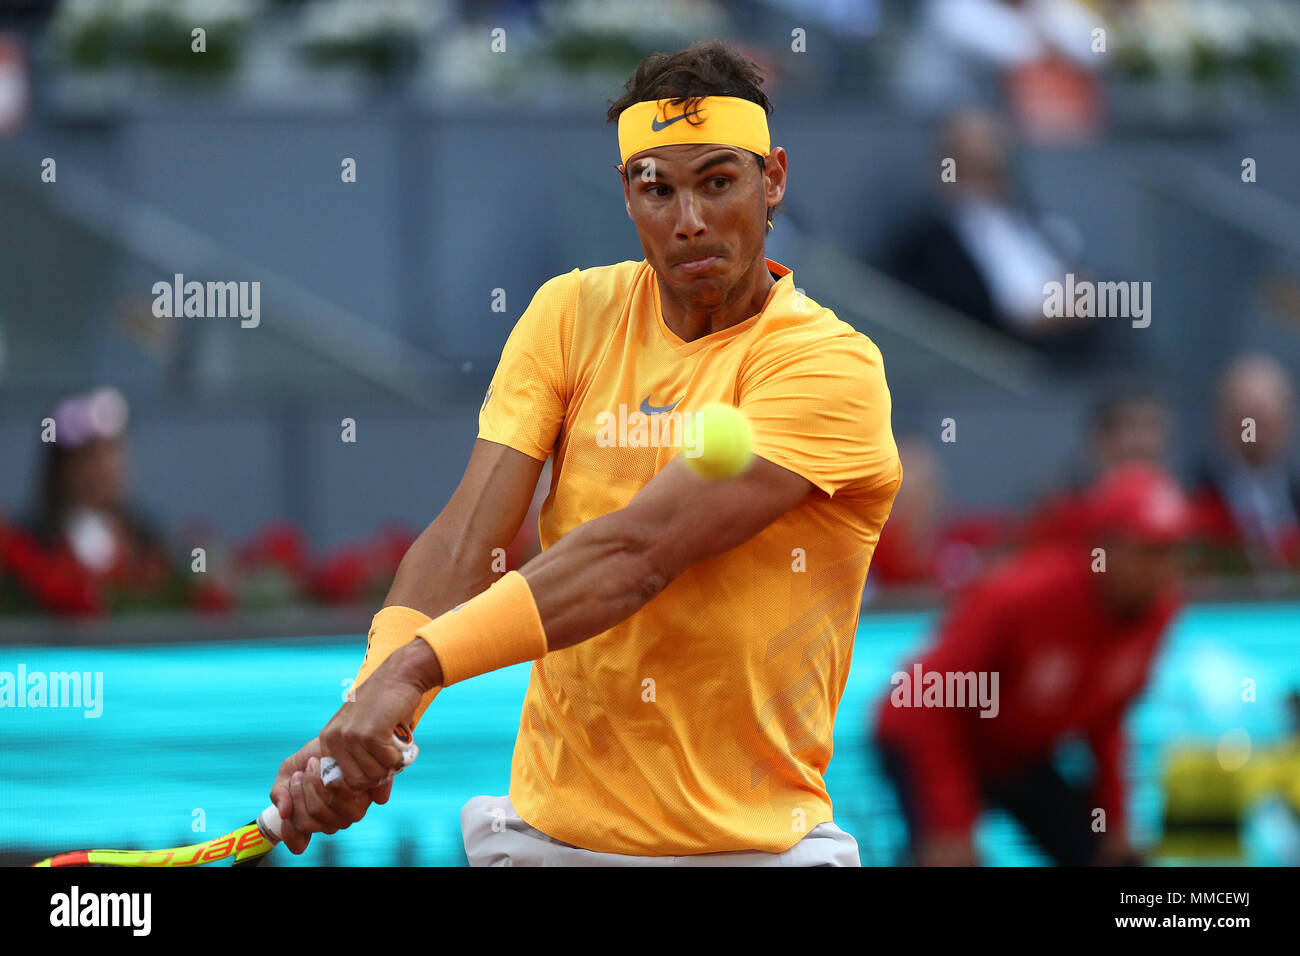 Madrid, Spain. 10th May, 2018. Rafael Nadal of Spain plays a backhand  against Diego Schwartzman of Argentina in their third round match during  day six of the Mutua Madrid Open tennis tournament